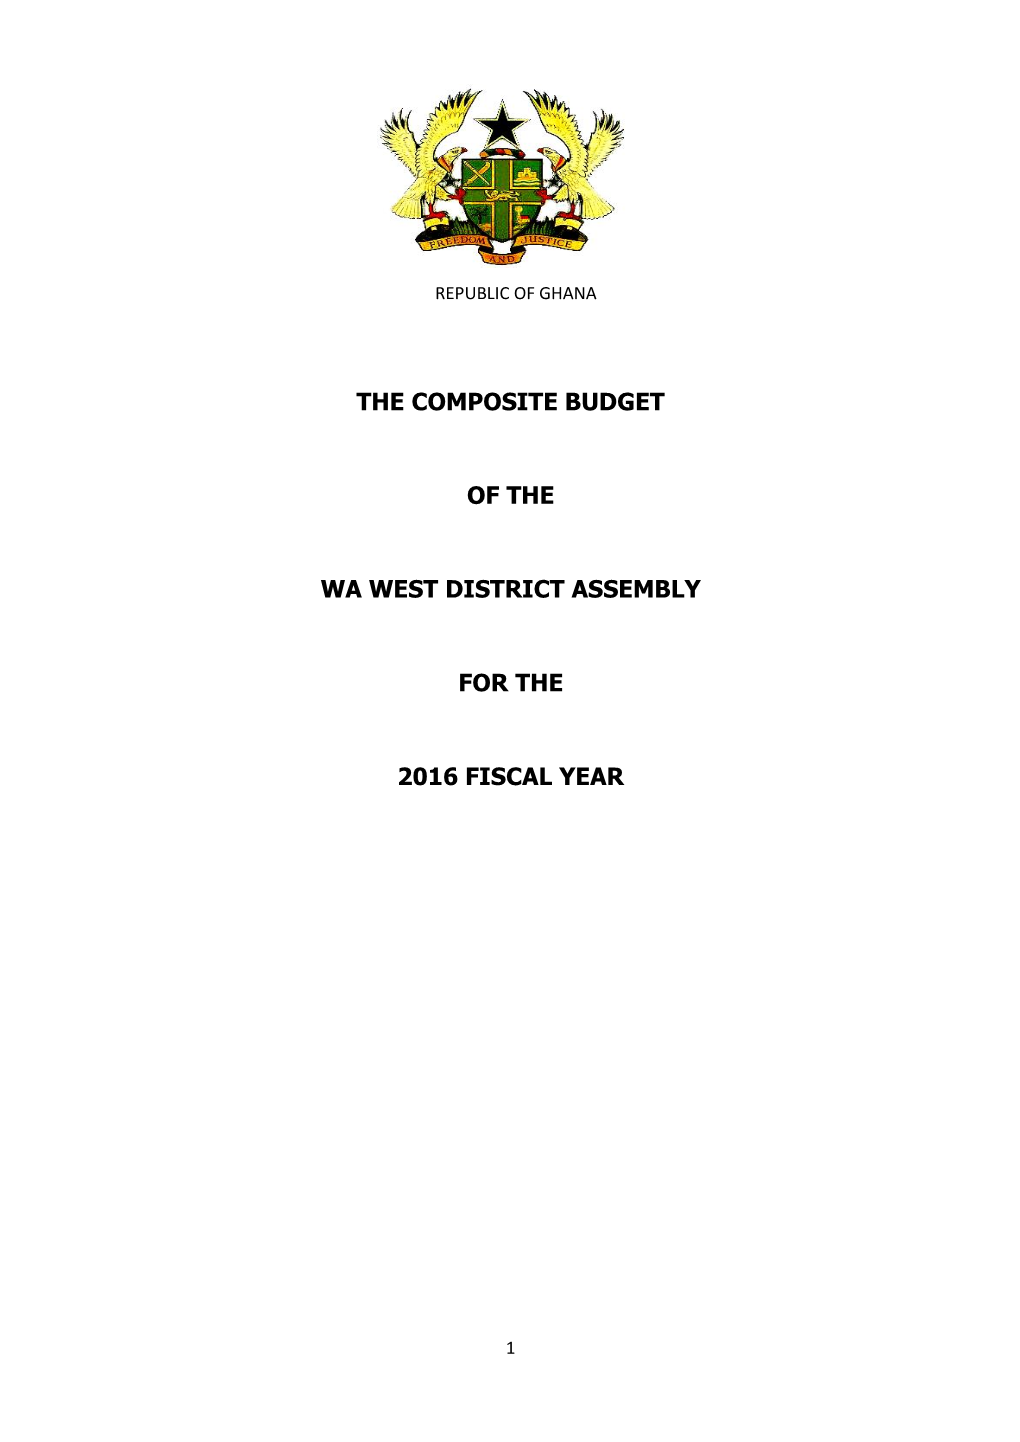 The Composite Budget of the Wa West District Assembly for the 2016 Fiscal